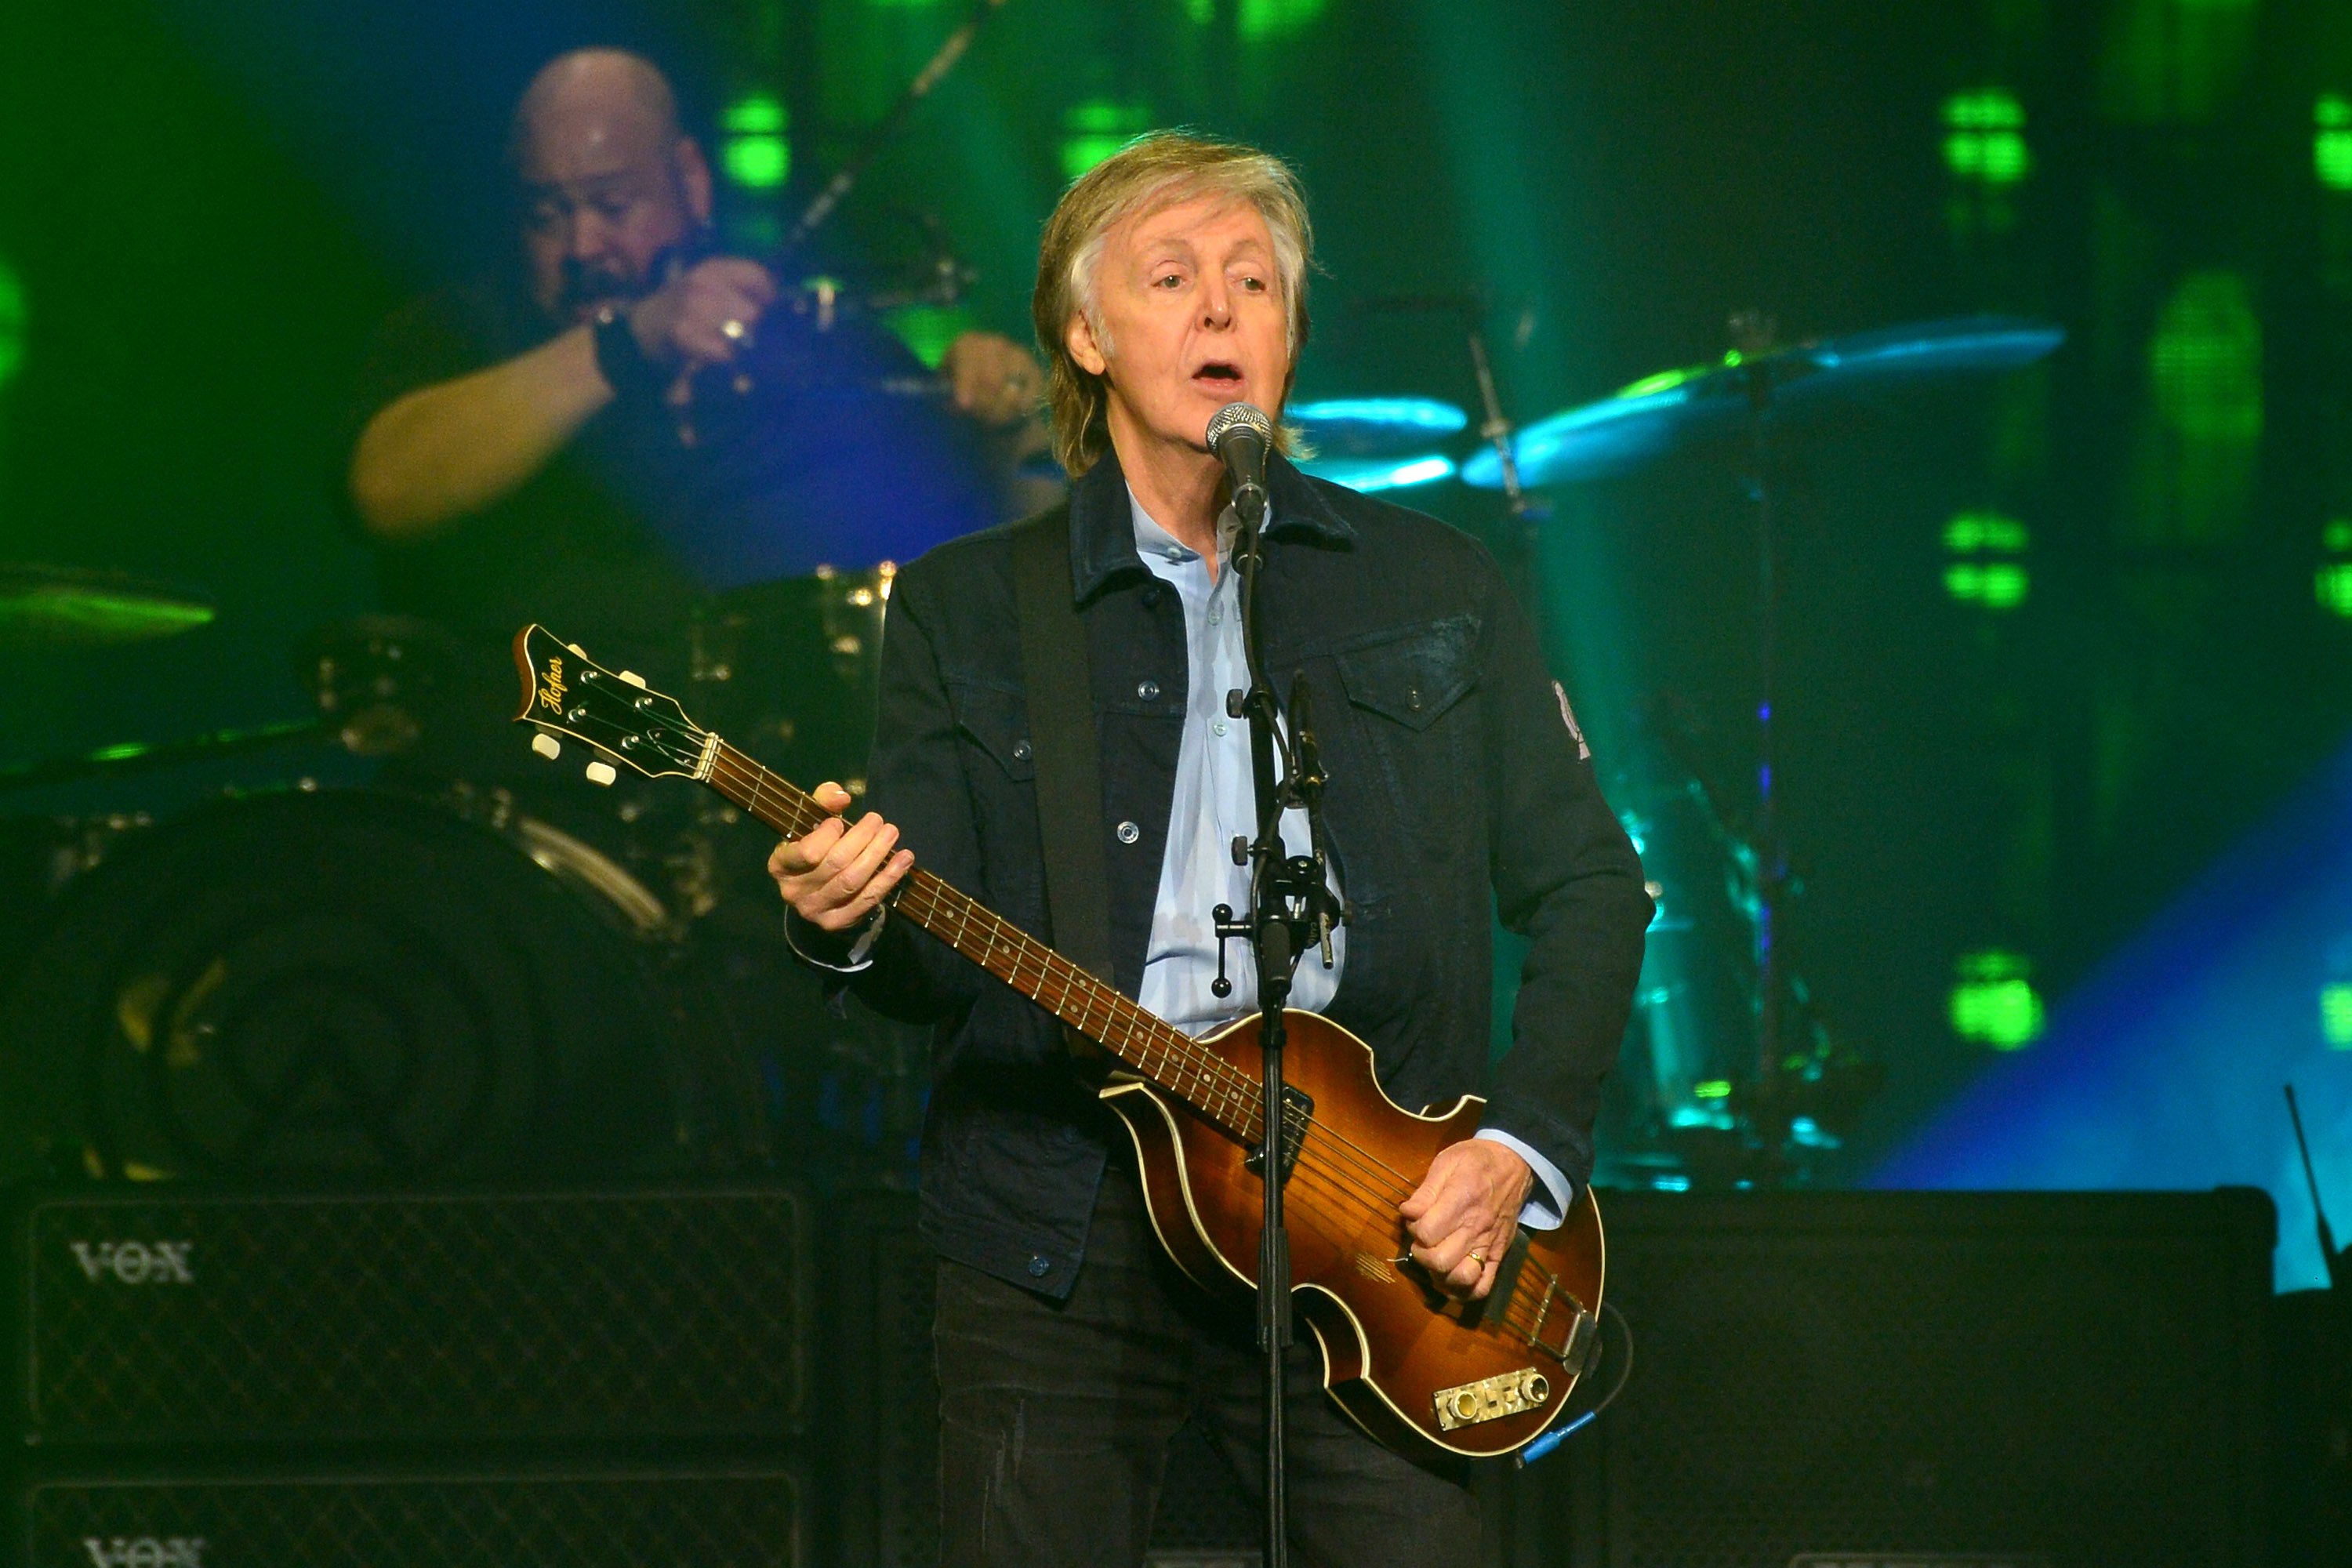 Paul McCartney performs on stage at the O2 Arena in 2018